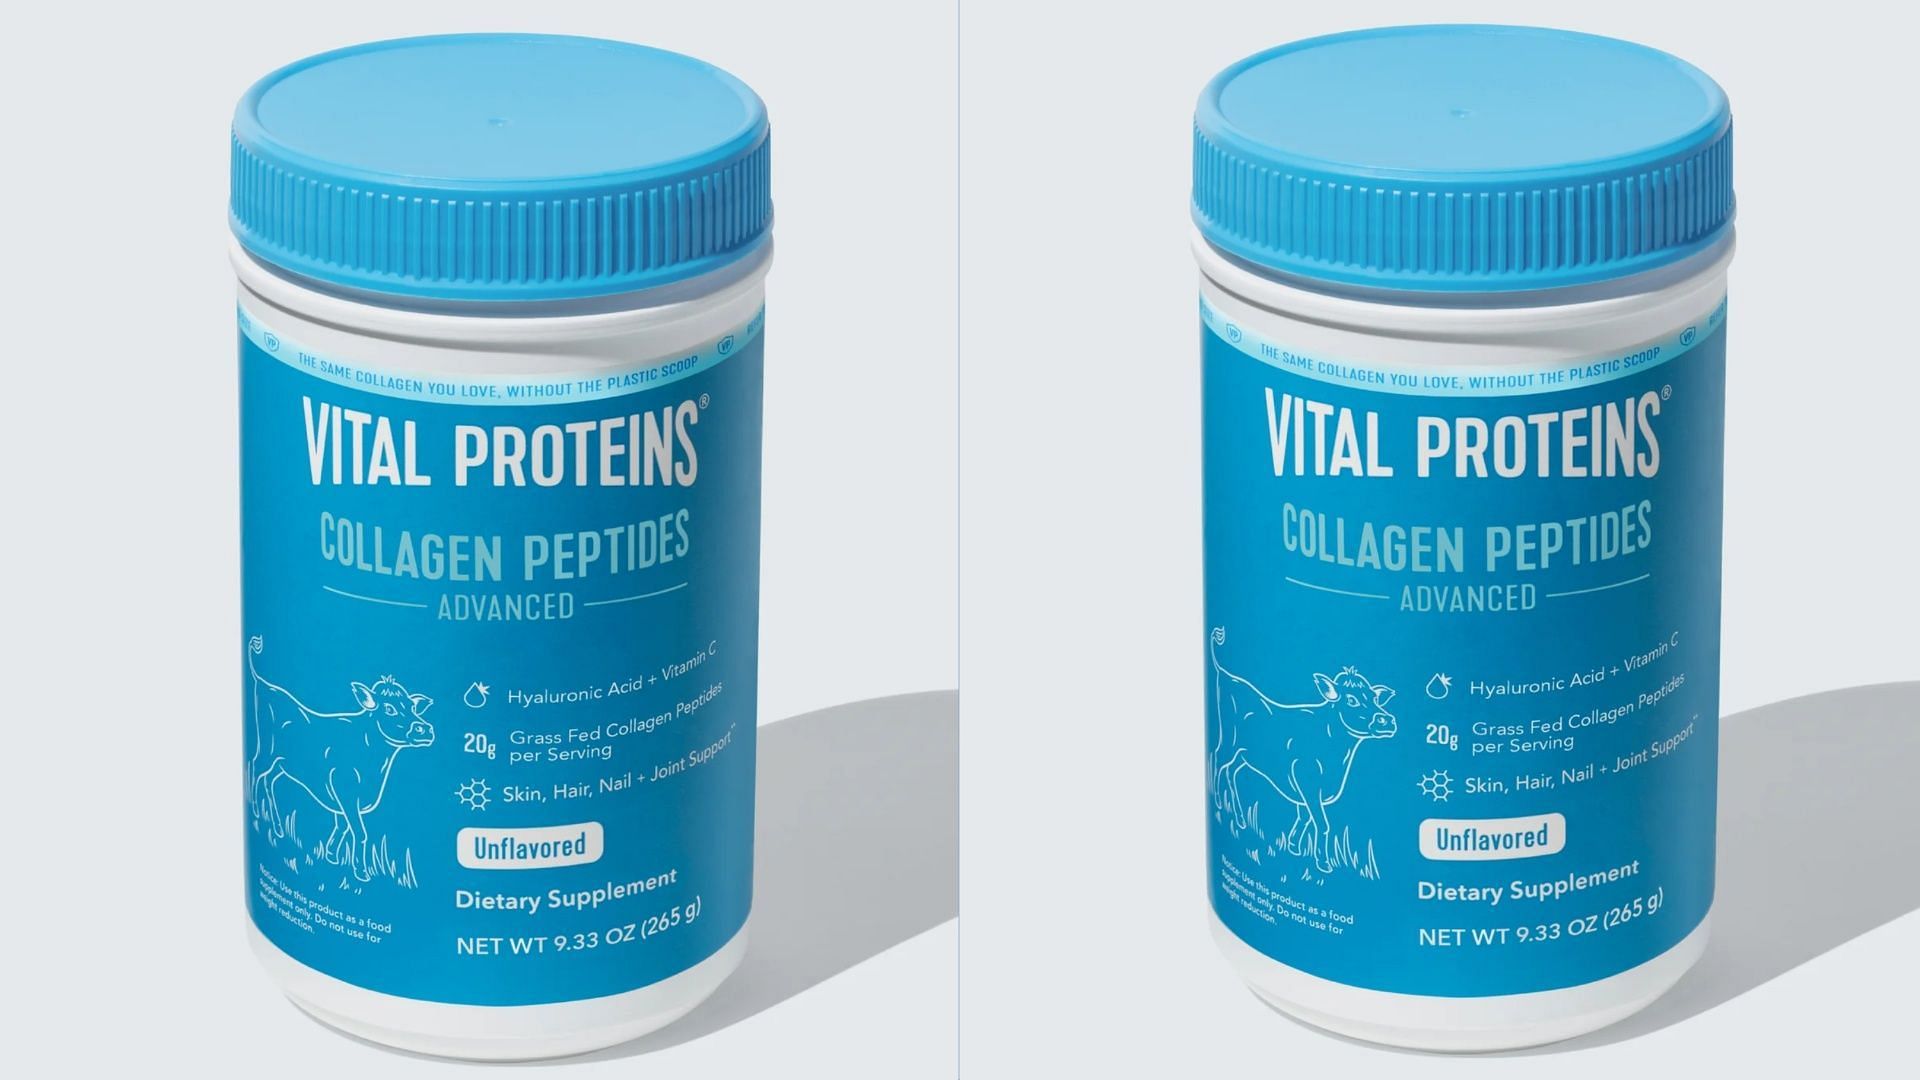 The recalled Vital Proteins Collagen Peptides were sold through Costco stores (Image via Vital Proteins)